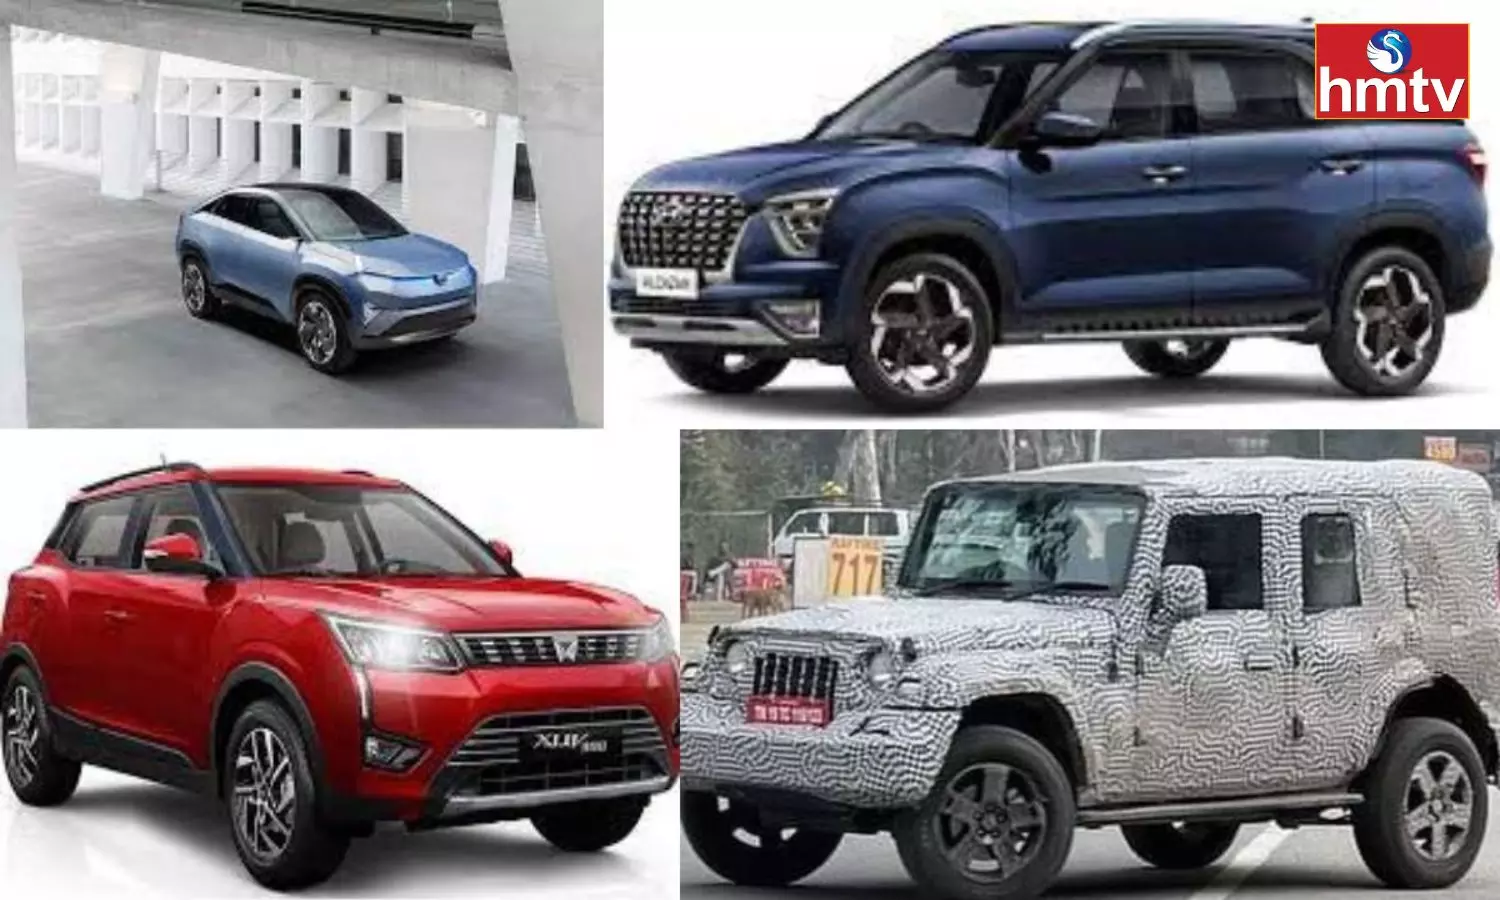 From Tata curvv to Mahindra thar 5 door these 5 new diesel SUVs coming in India check price and features